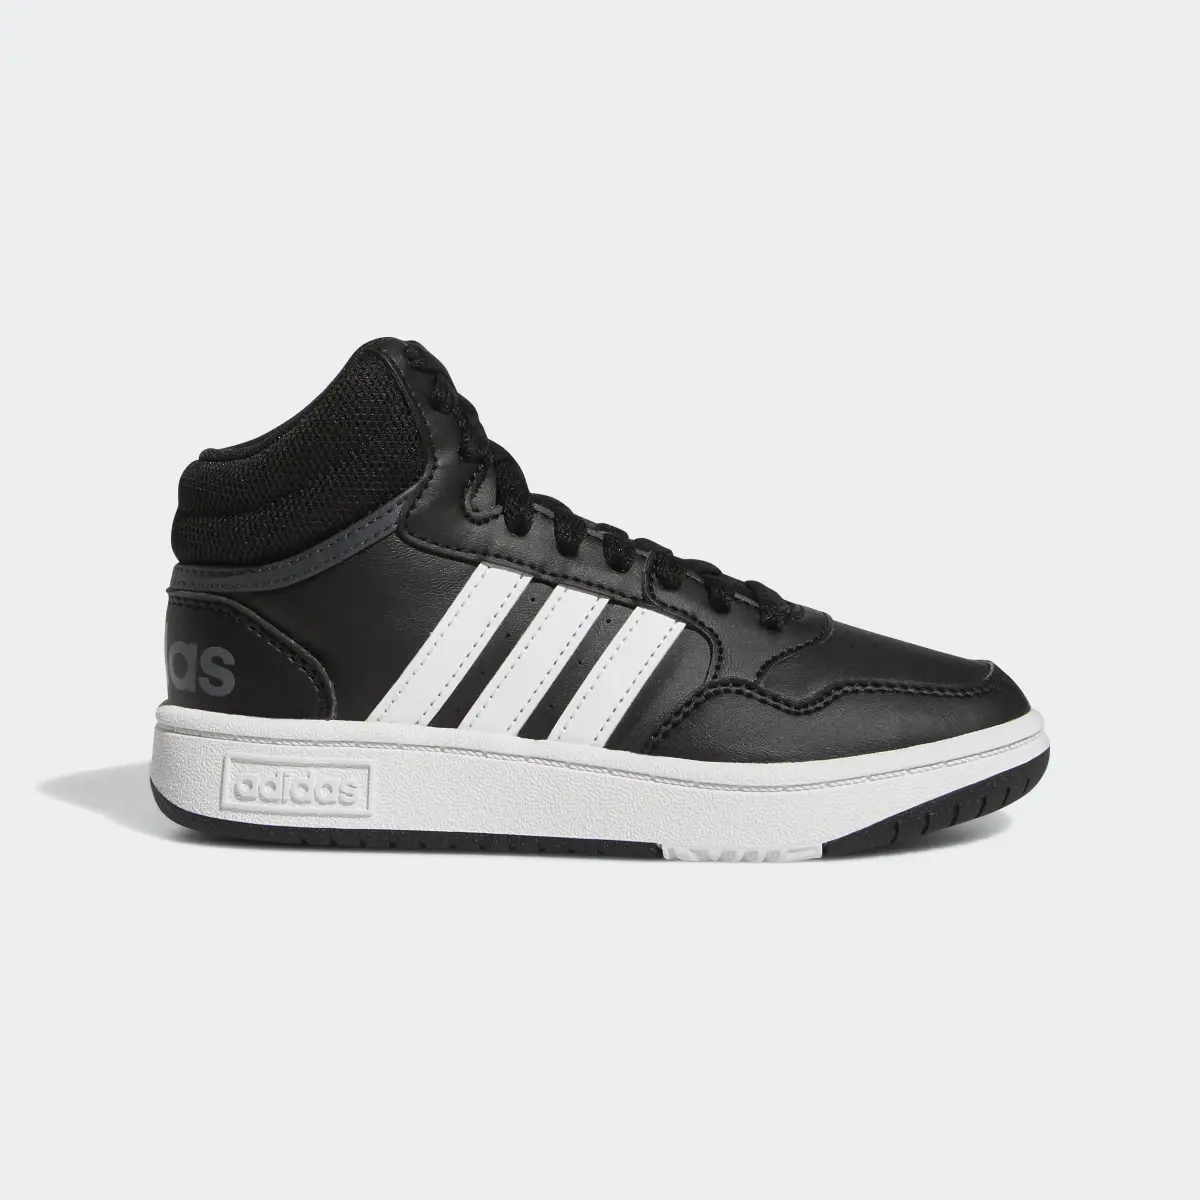 Adidas Hoops Mid Shoes. 2